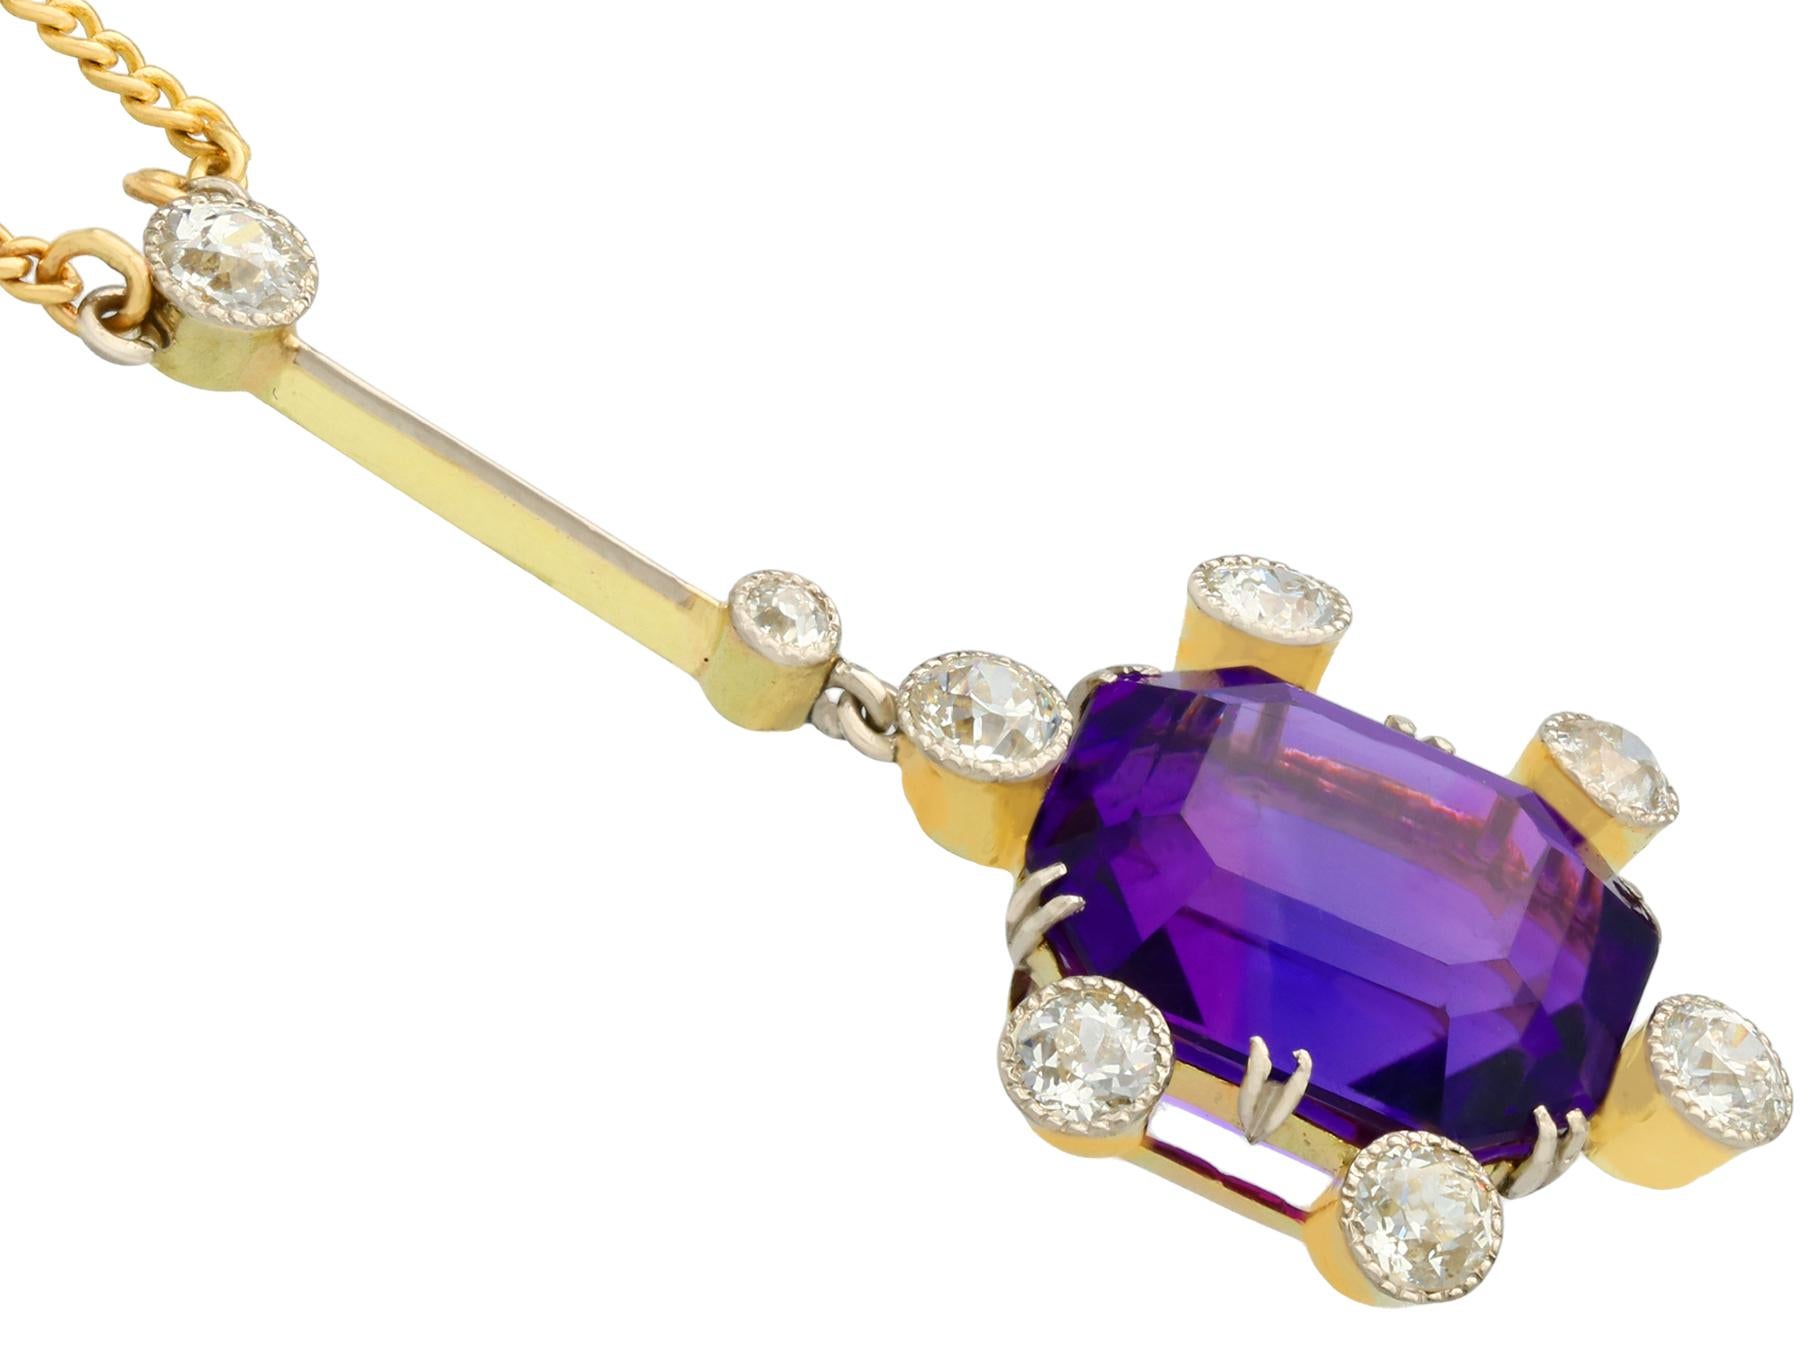 7.13 Carat Amethyst and 1.06 Carat Diamond Yellow Gold Palladium Set Pendant In Excellent Condition For Sale In Jesmond, Newcastle Upon Tyne